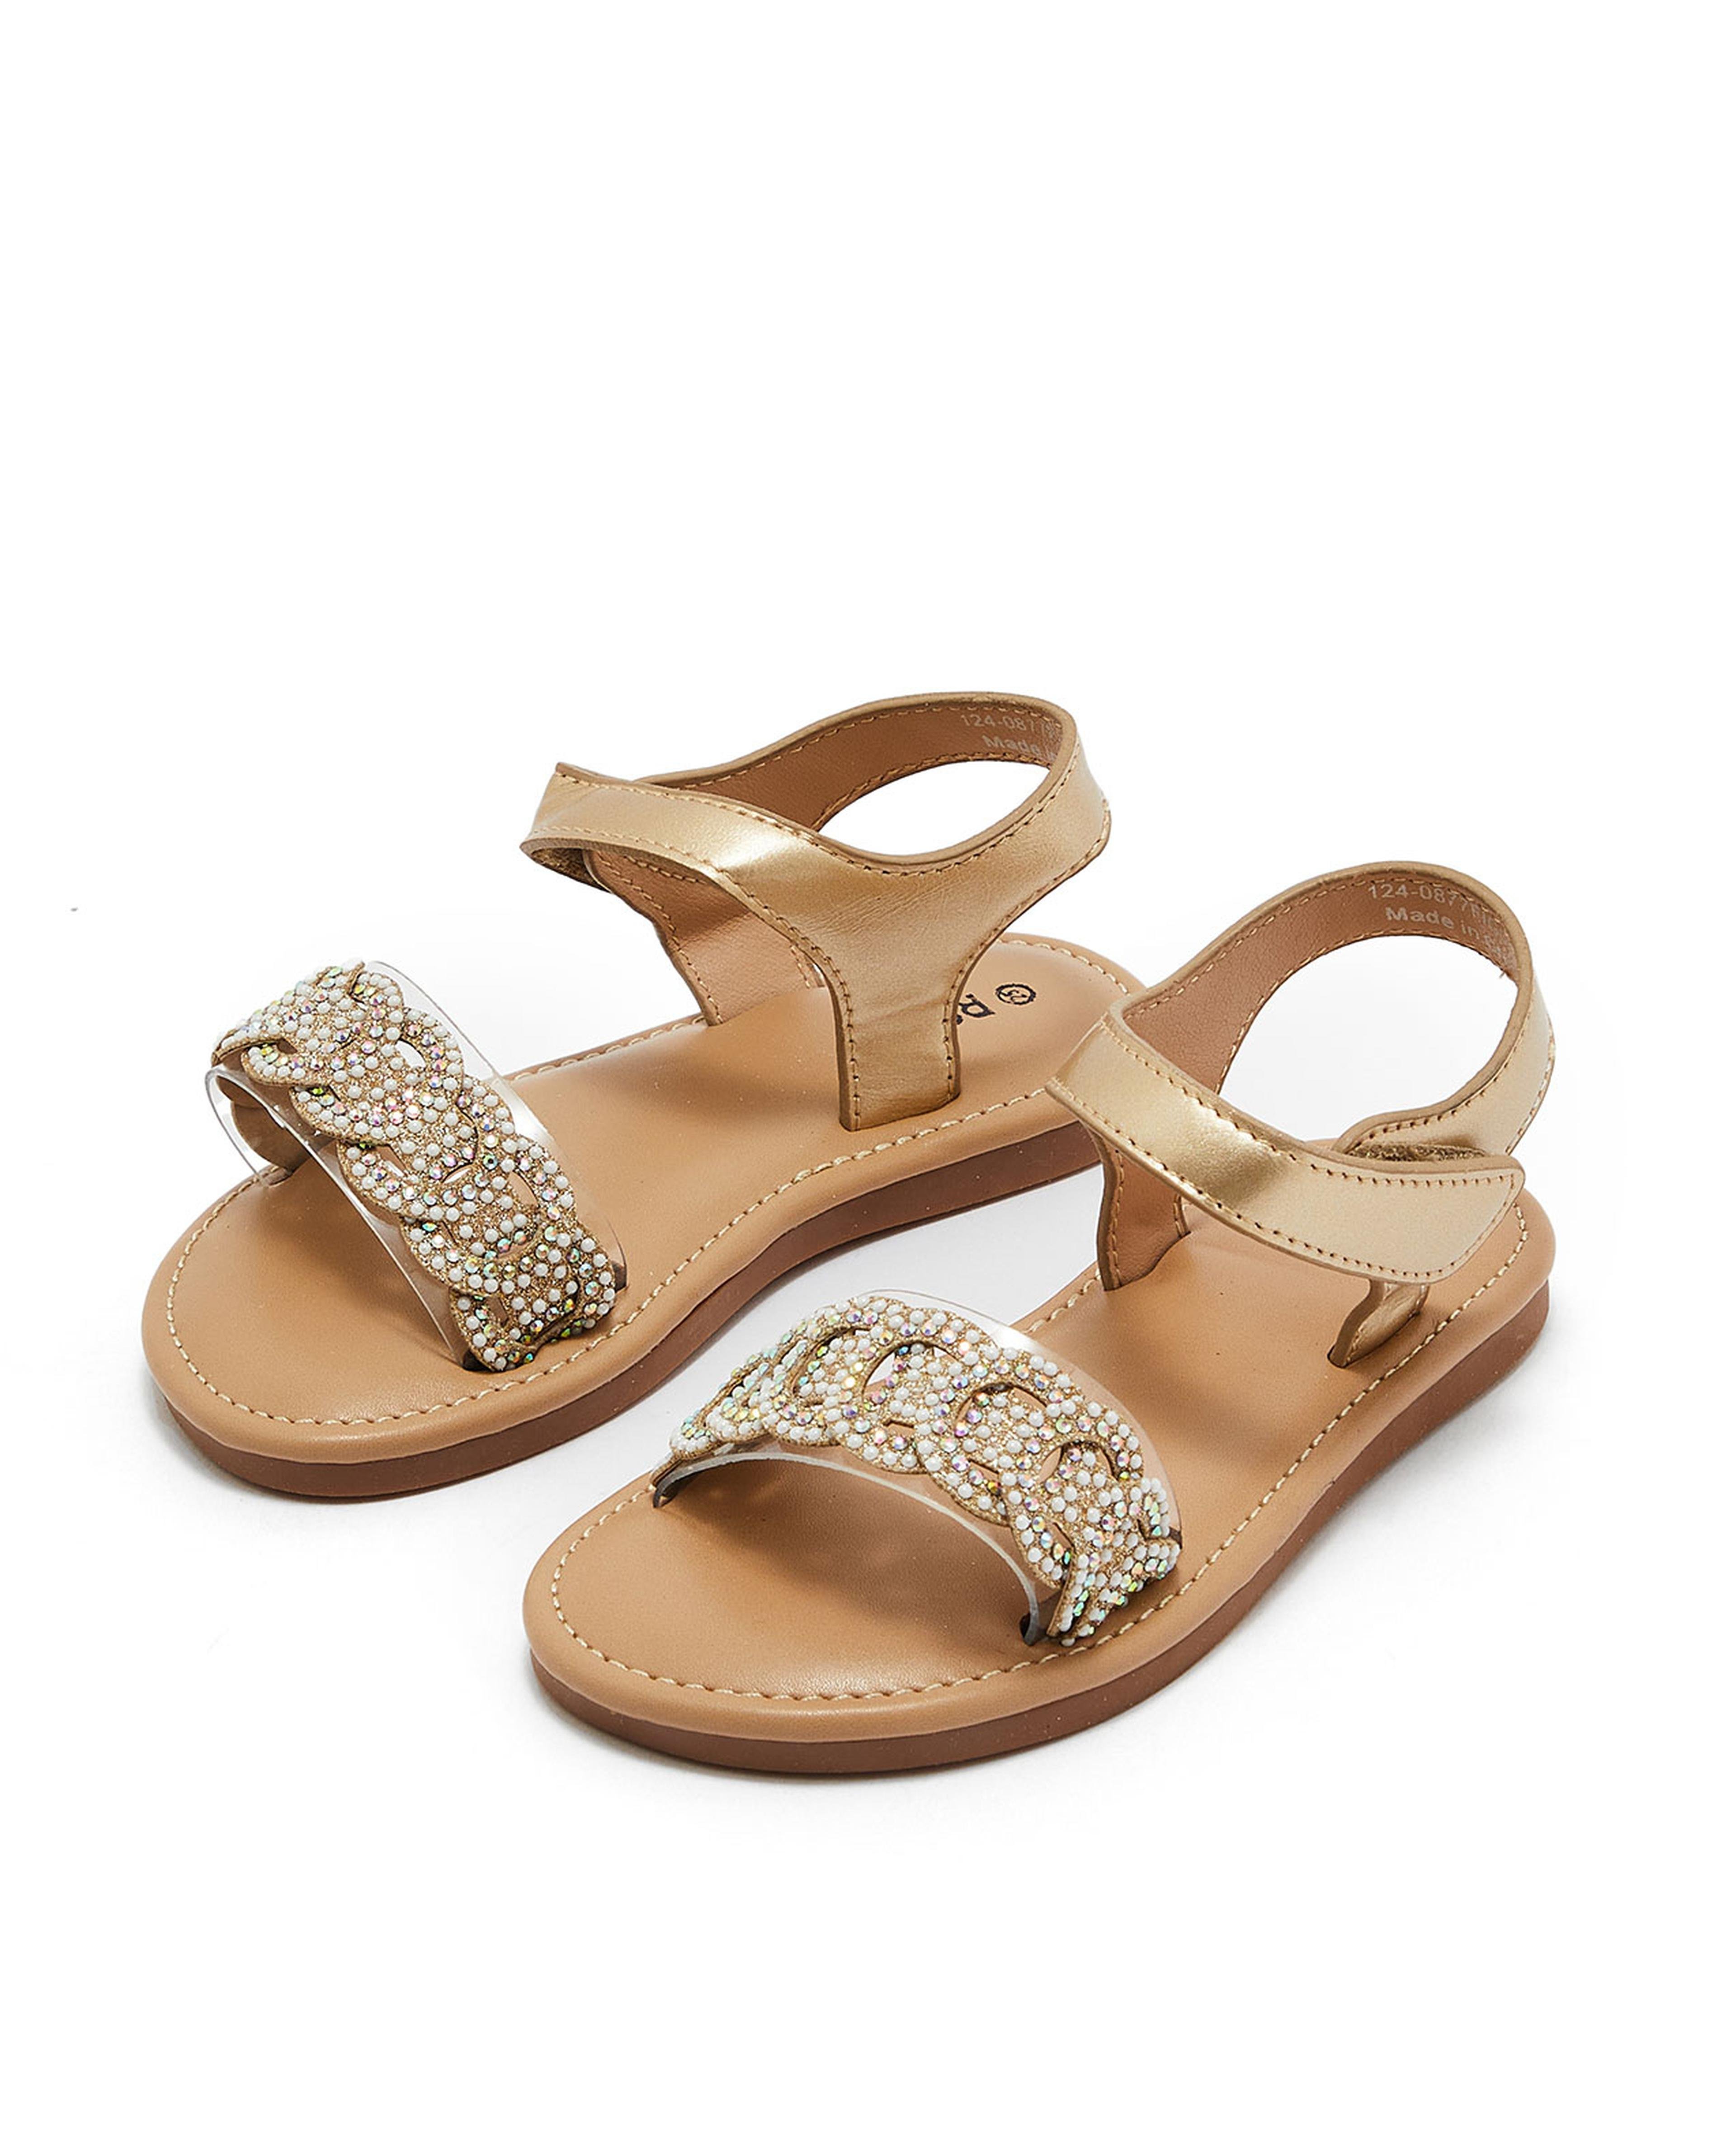 Embellished Sandals with Velcro Closure